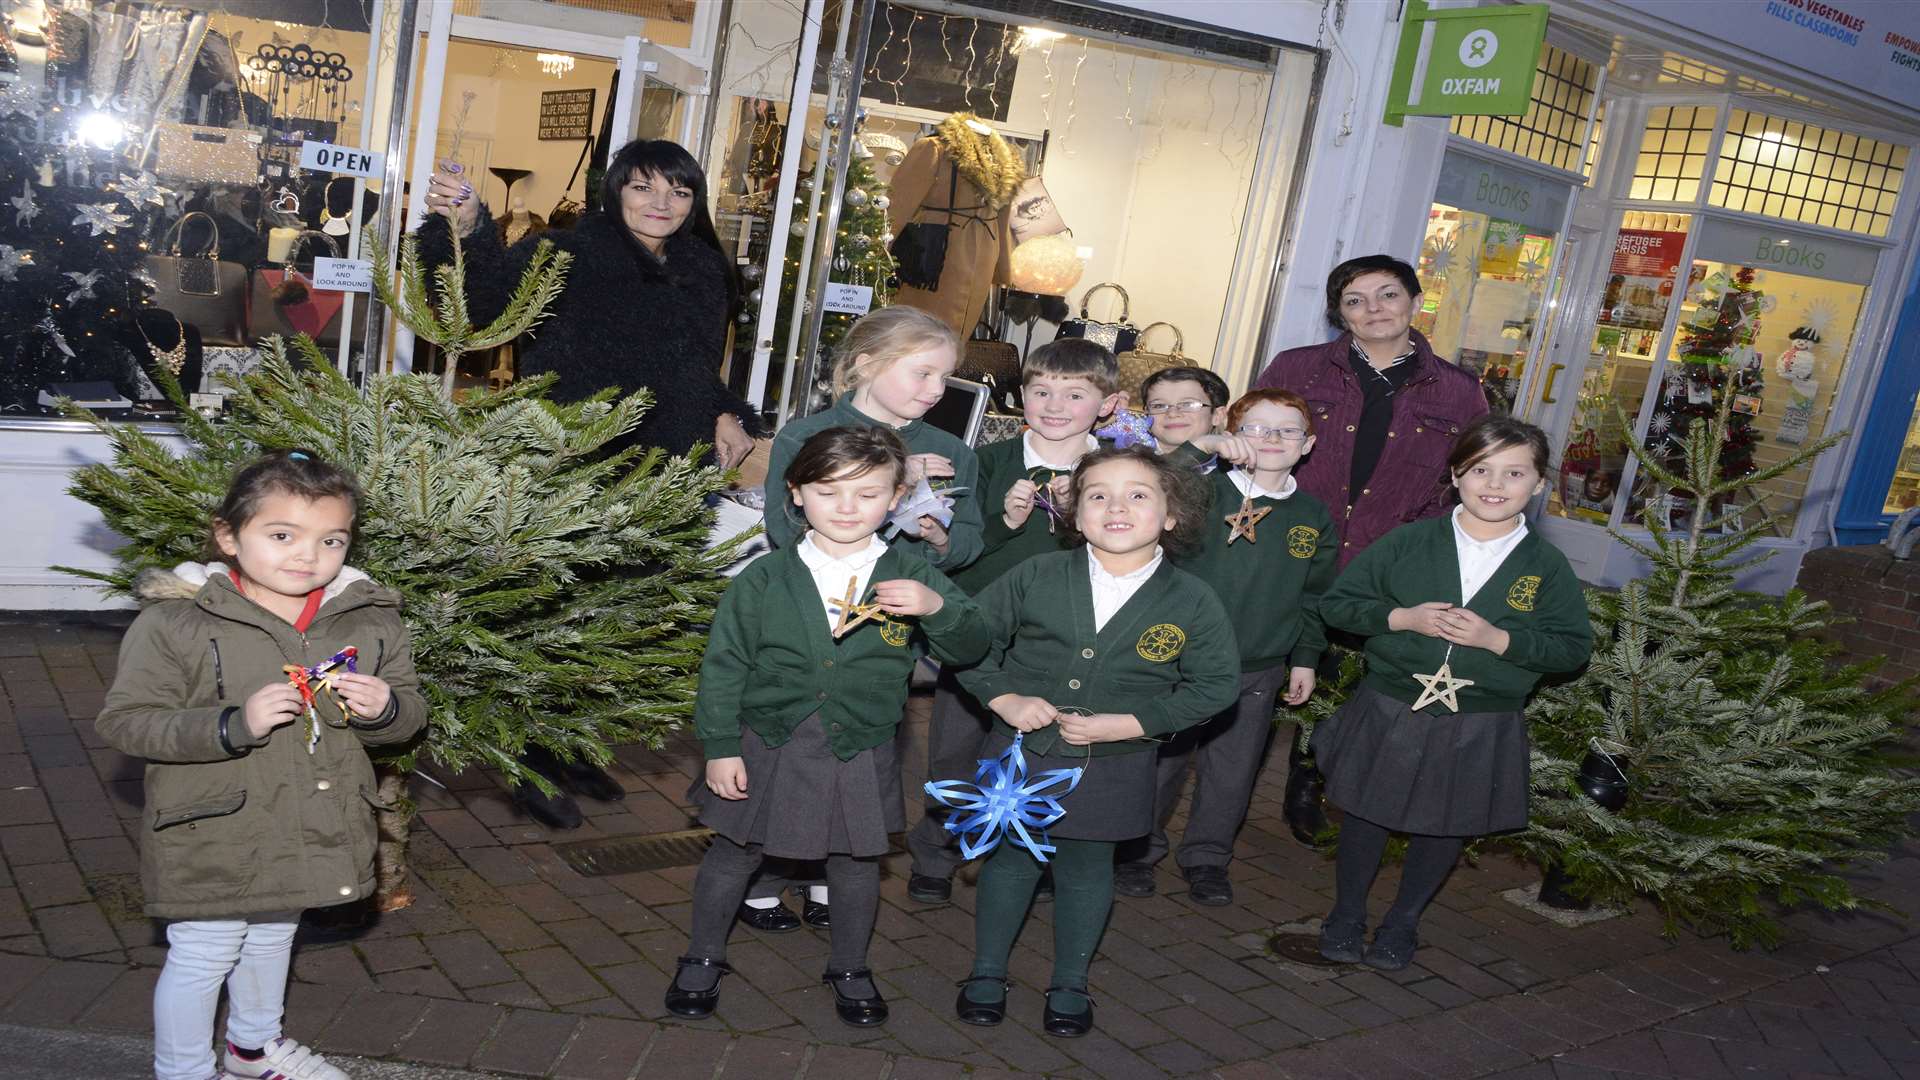 Diva Boutique owner Amanda Goring and Hair stylist Tanya Freney with youngsters from Deal Parochial school. They decorated the Christmas trees outside the shop with decorations they made